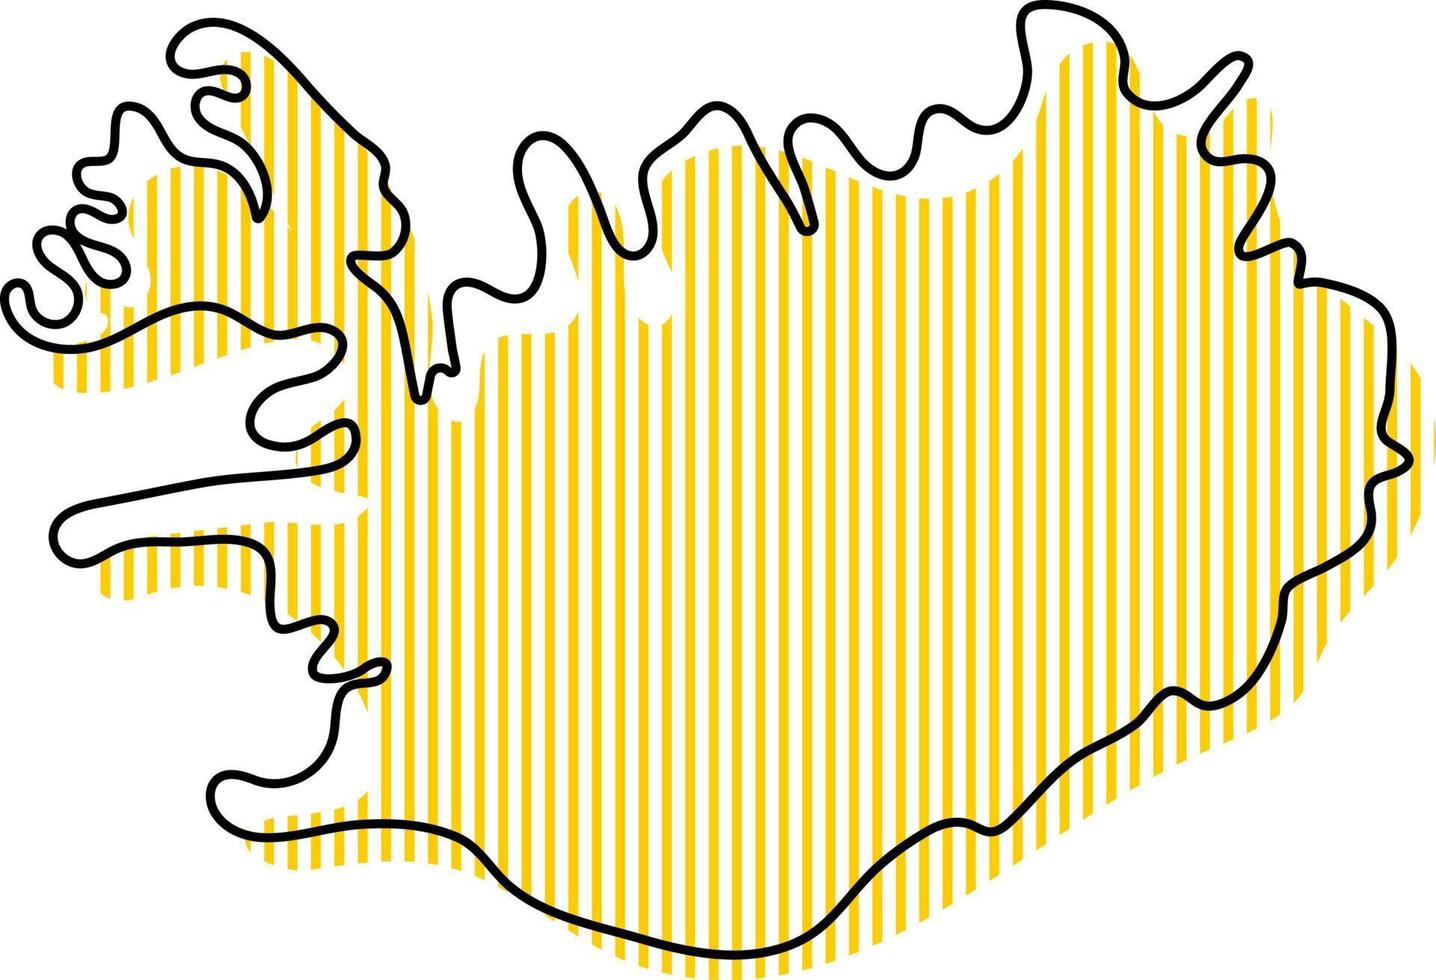 Stylized simple outline map of Iceland icon. vector